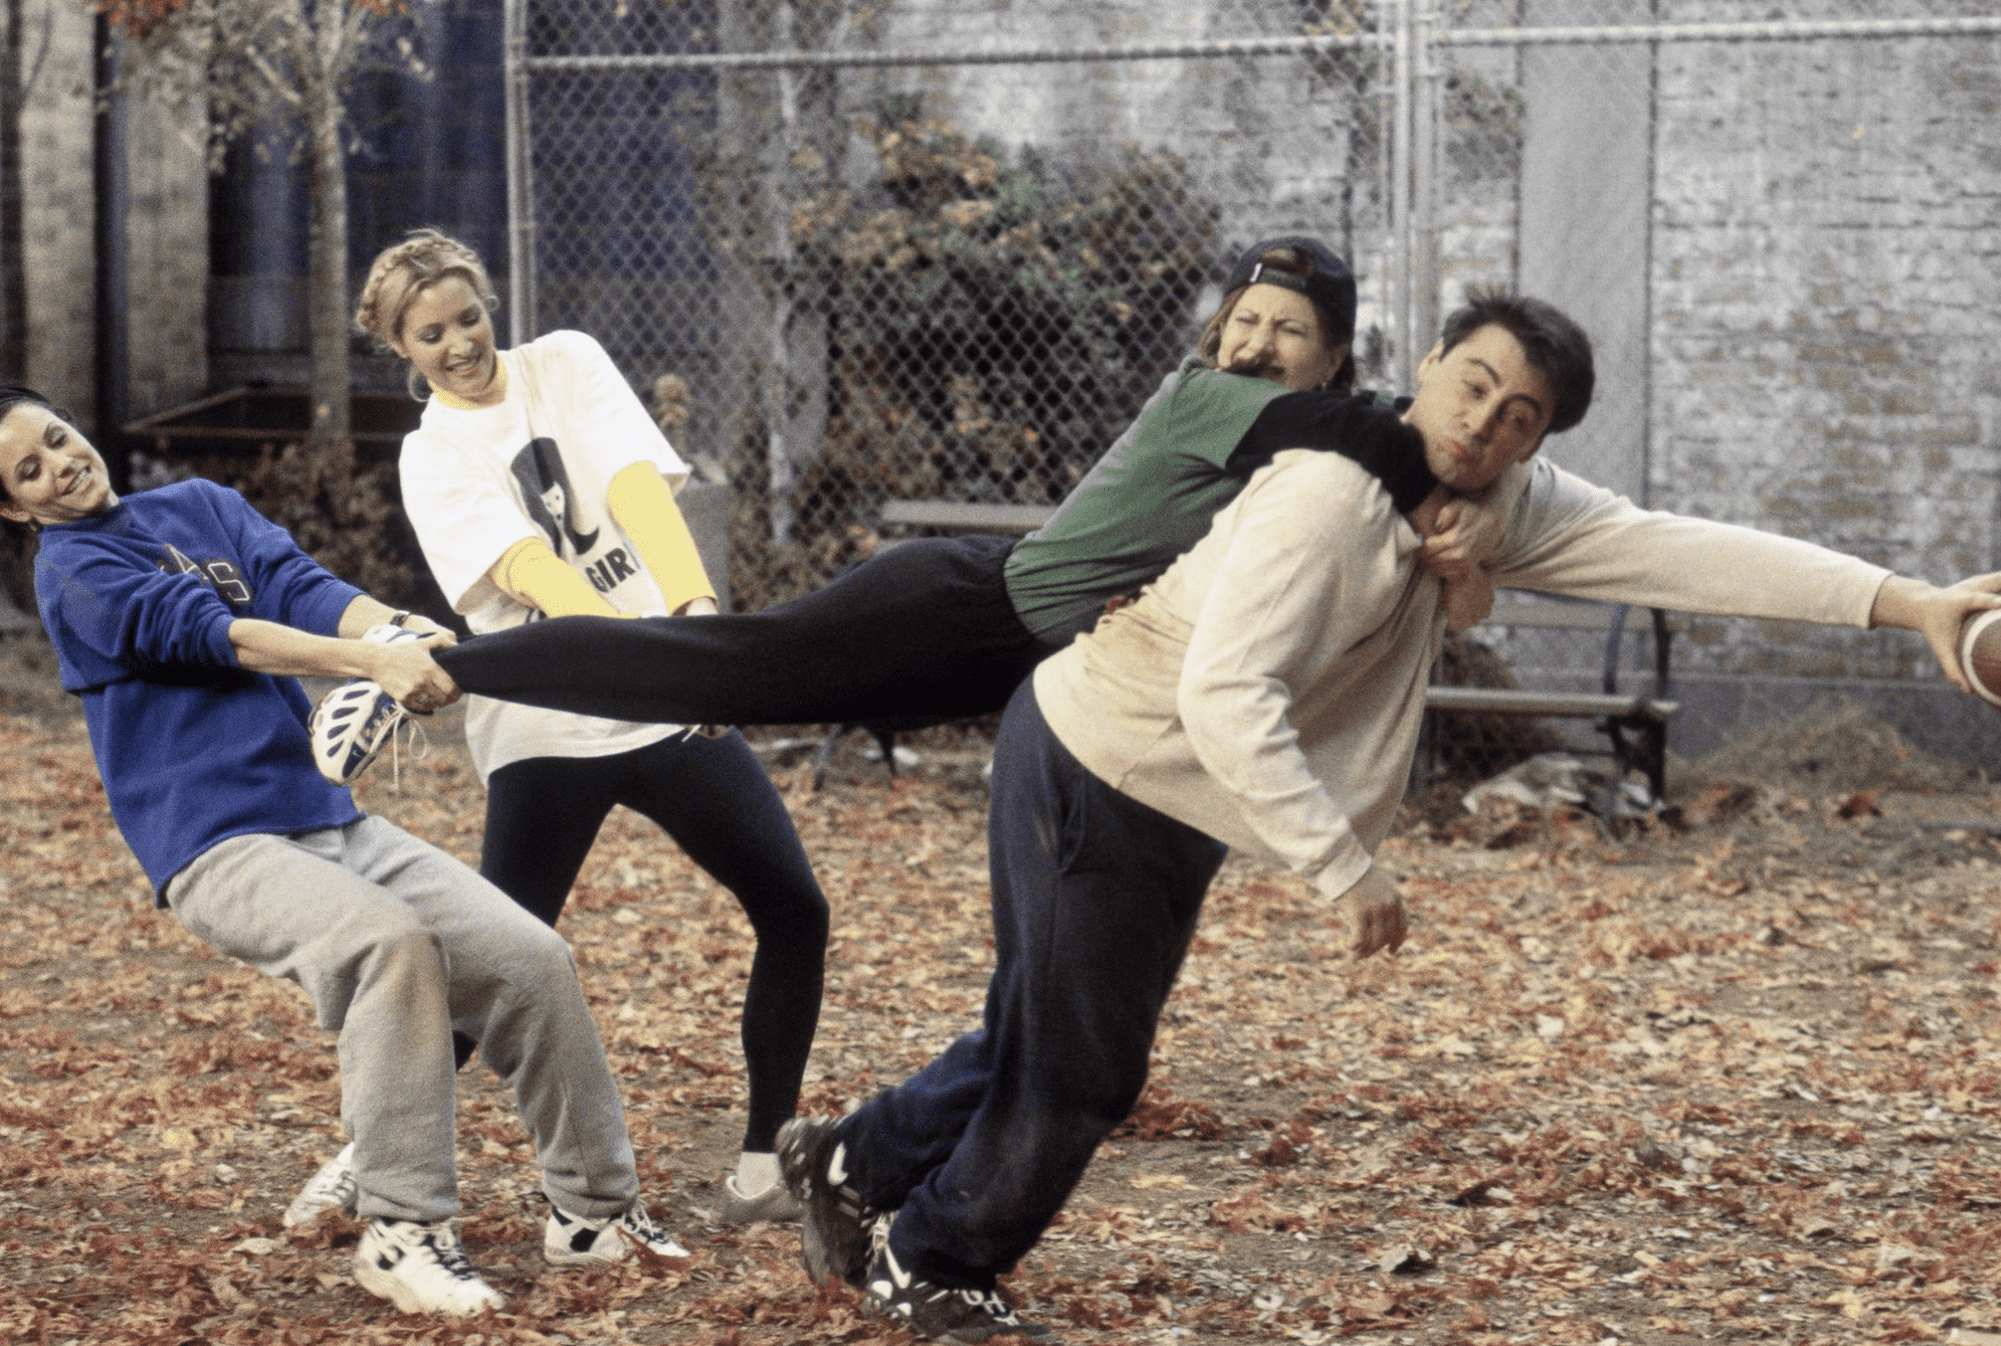 Monica, Phoebe, Rachel, and Chandler during a game of touch football at the park